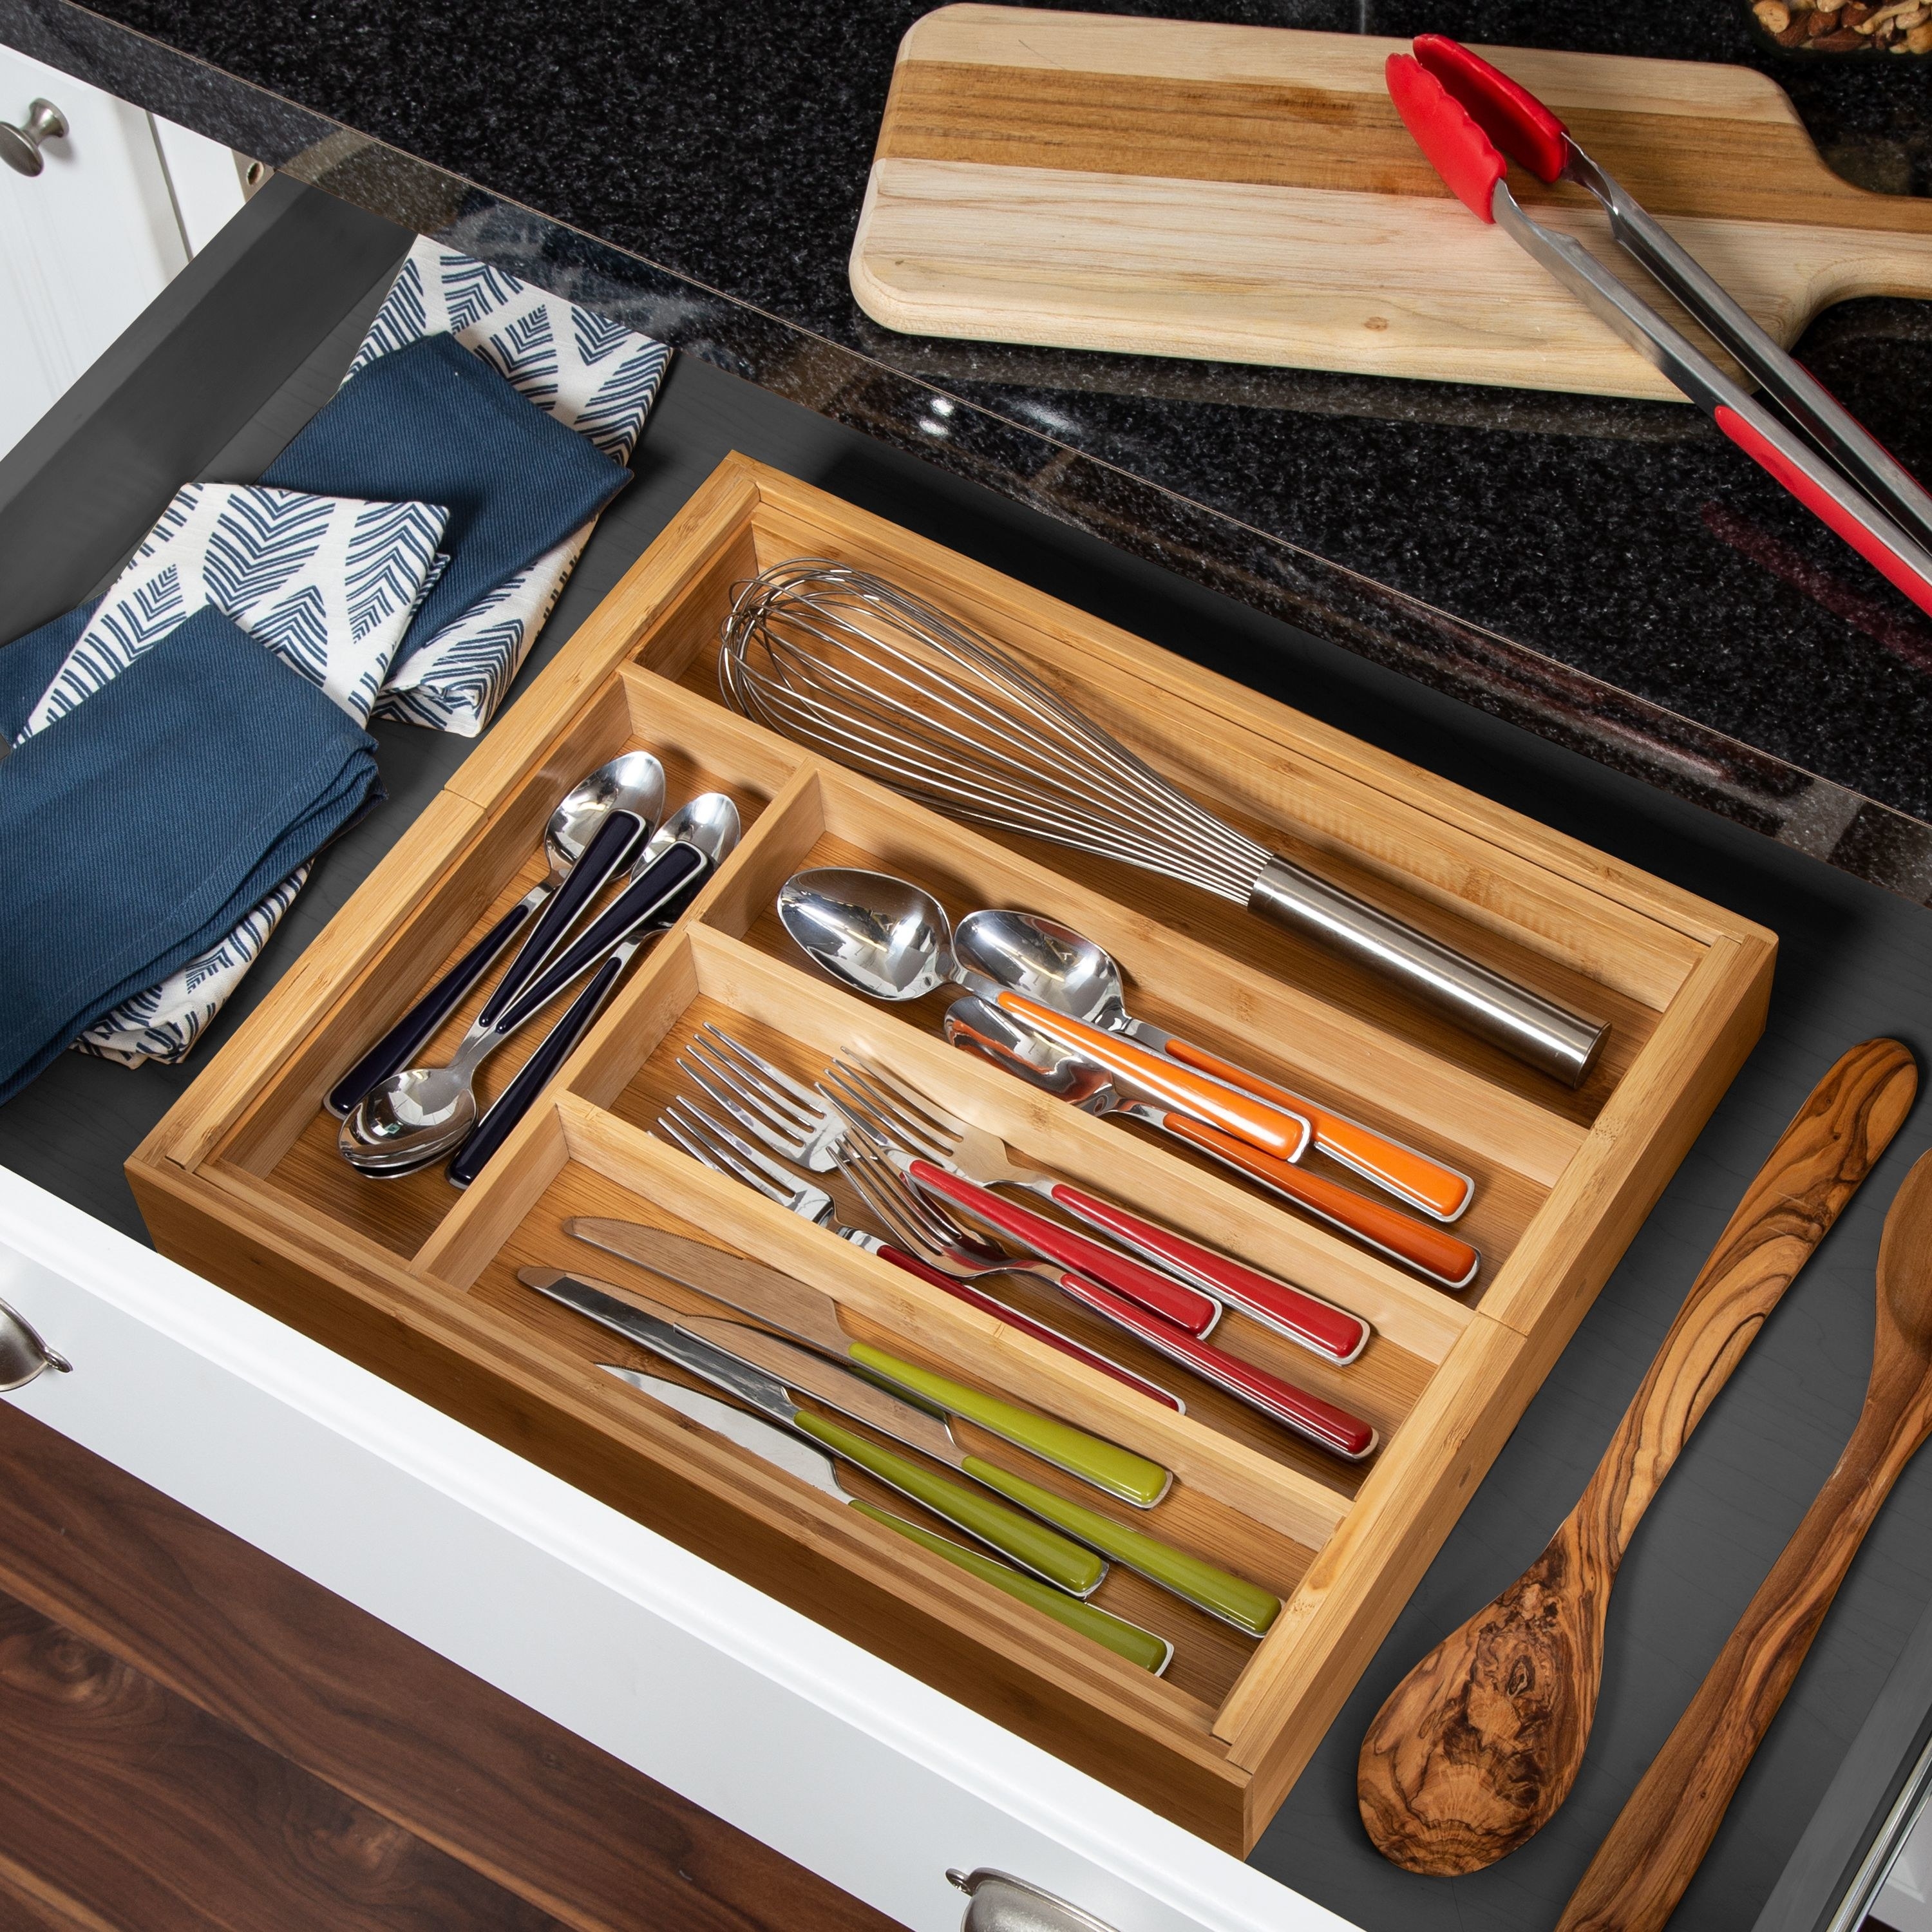 bamboo drawer organize inside a drawer and holding different utensils